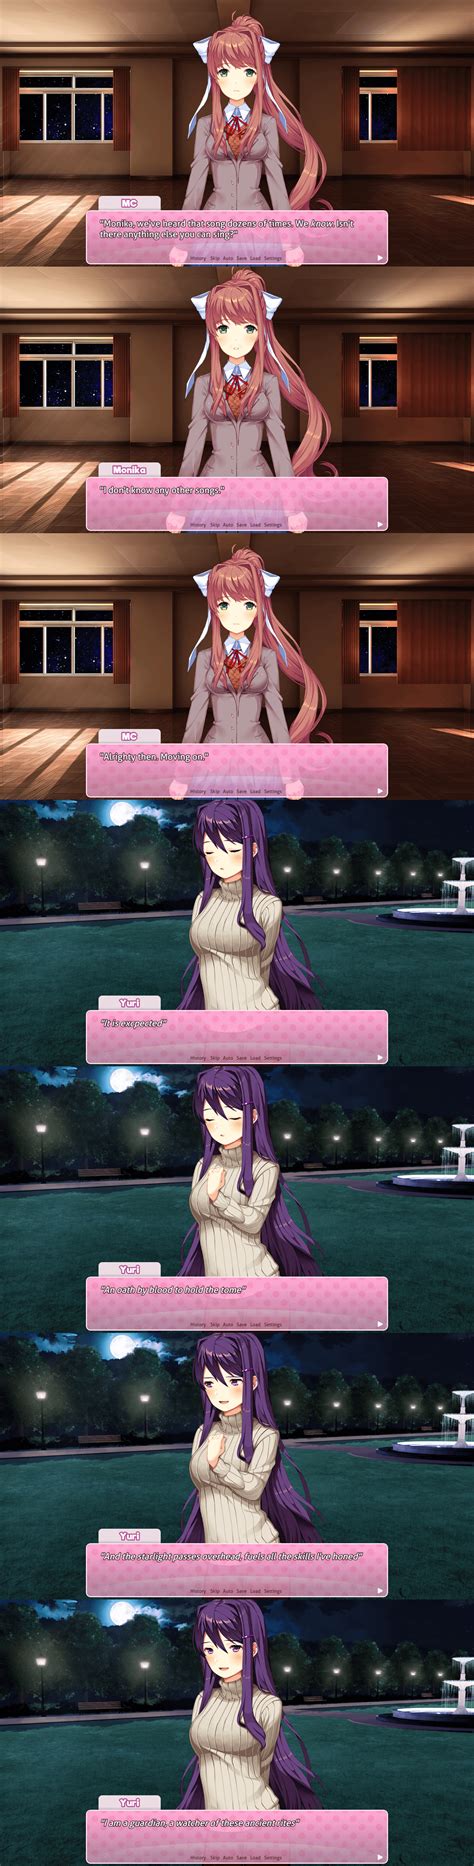 The Dokis Sing For Mc Rddlc